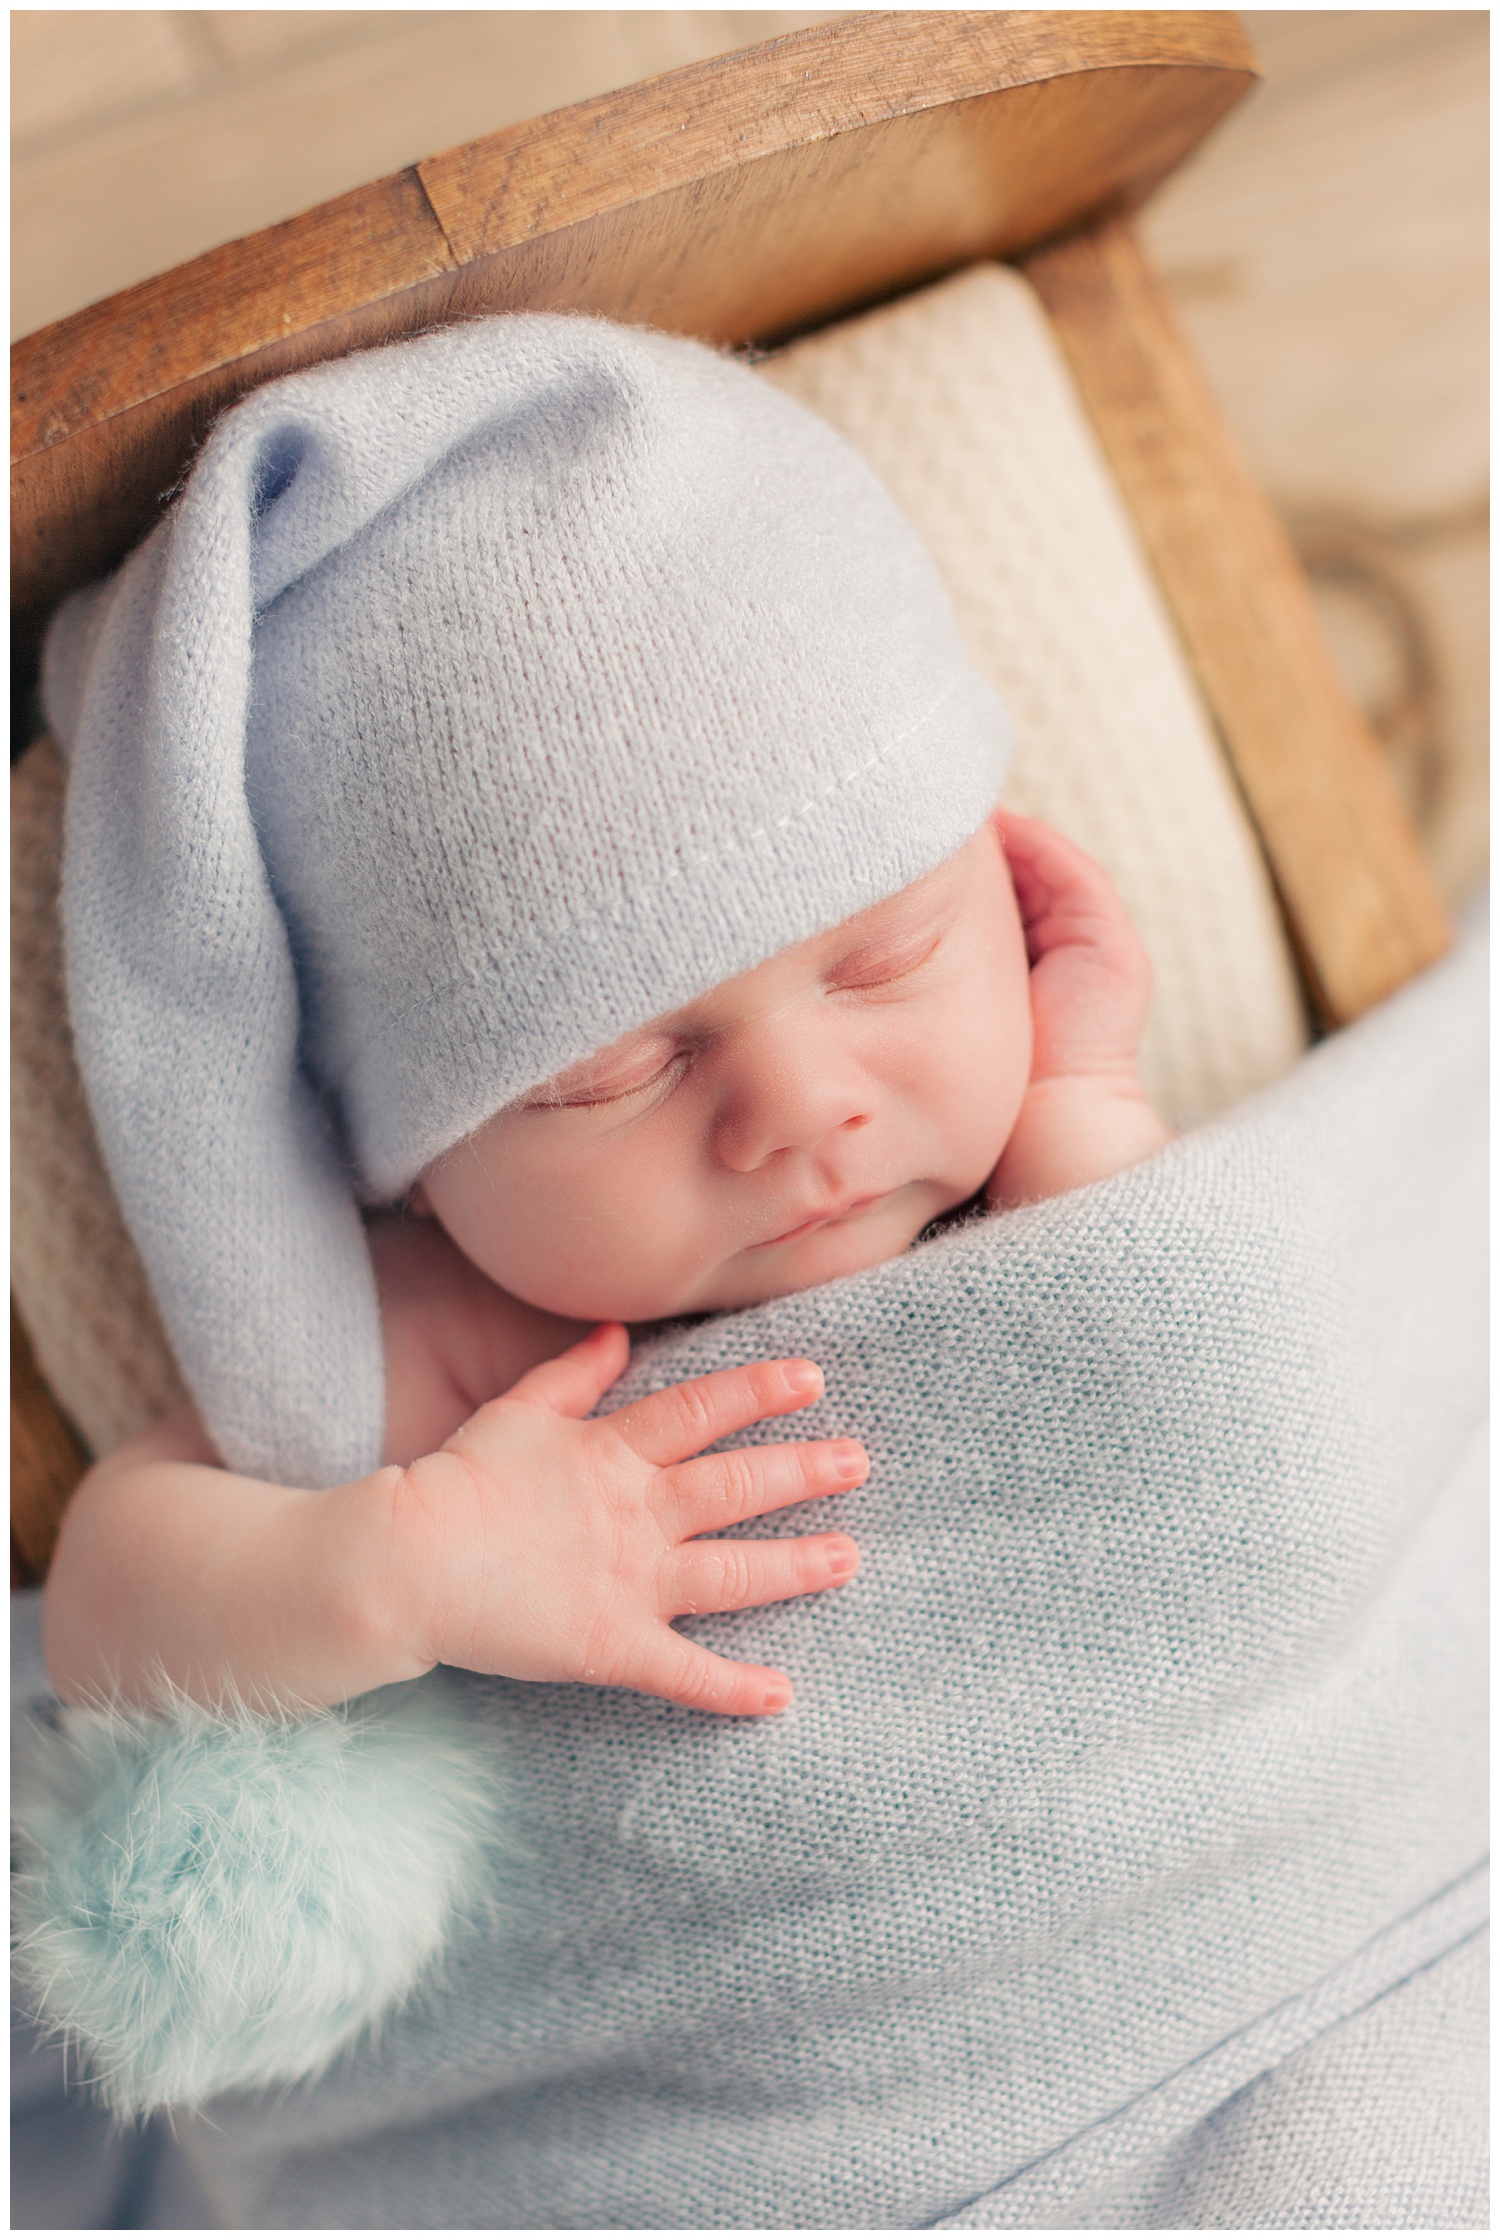 Baby Mason nestled in a wooden cradle wearing a soft blue night cap and swaddle | CB Studio